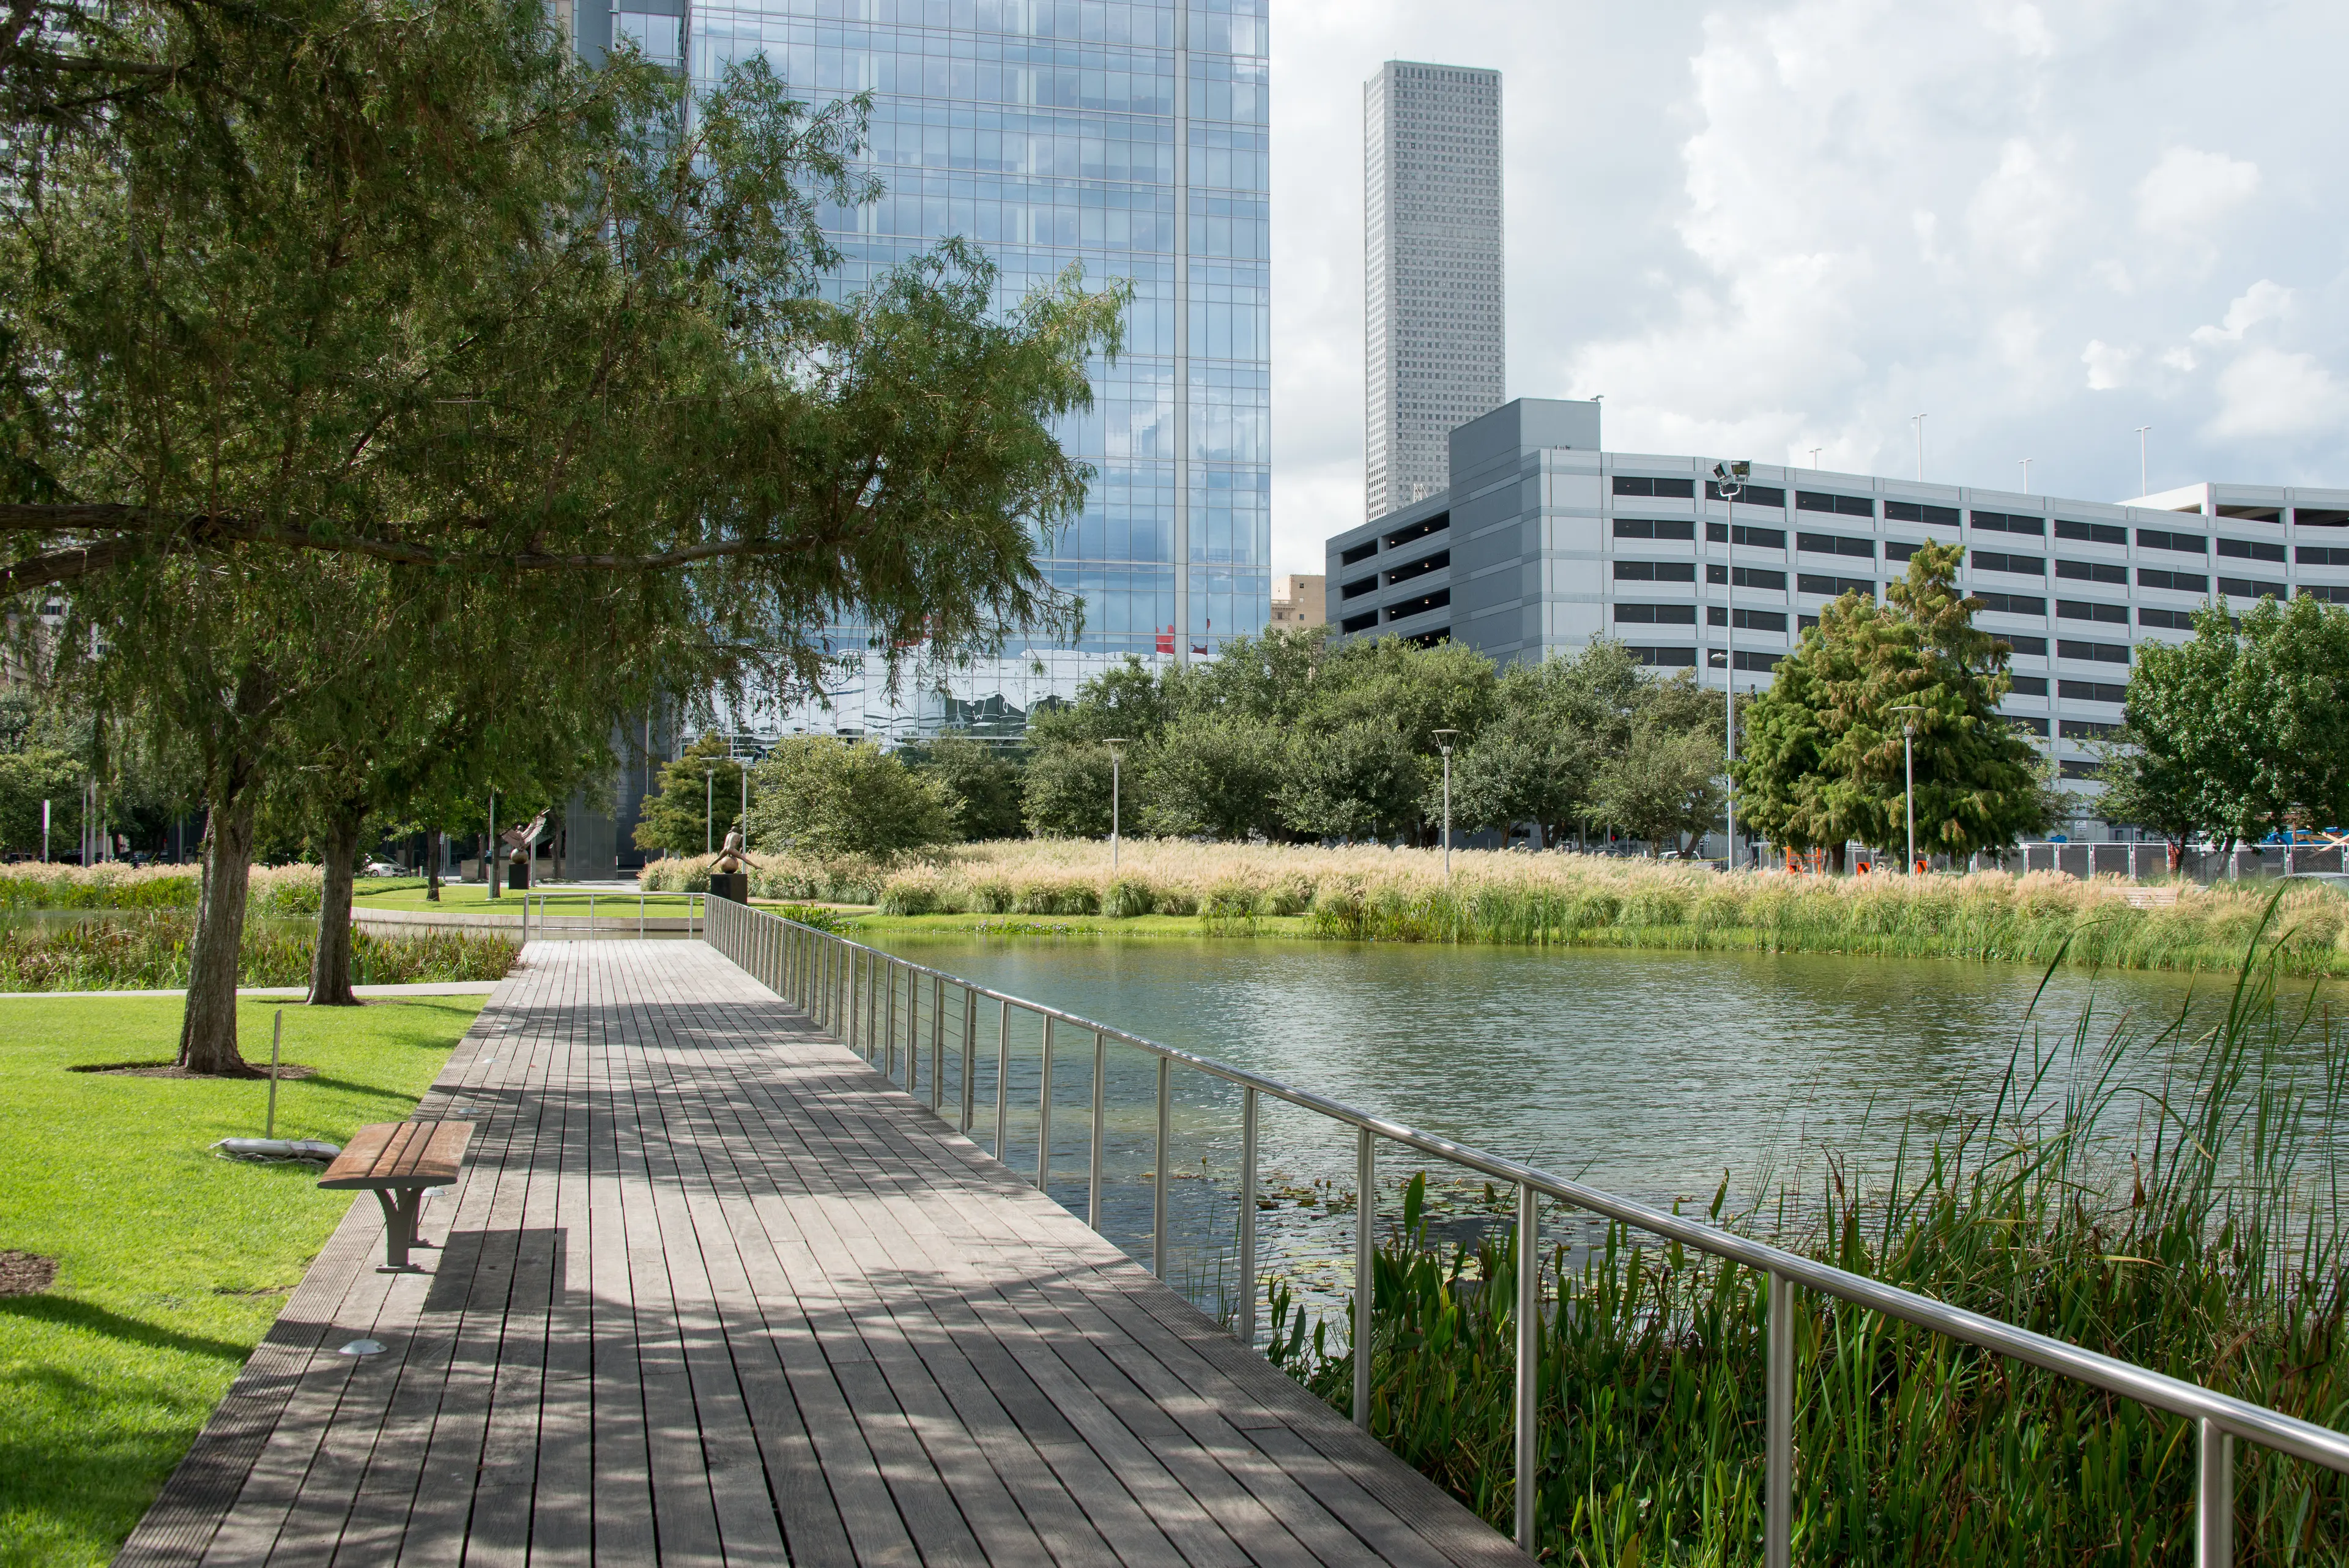 2-Day Local Food, Wine & Outdoor Adventure in Houston